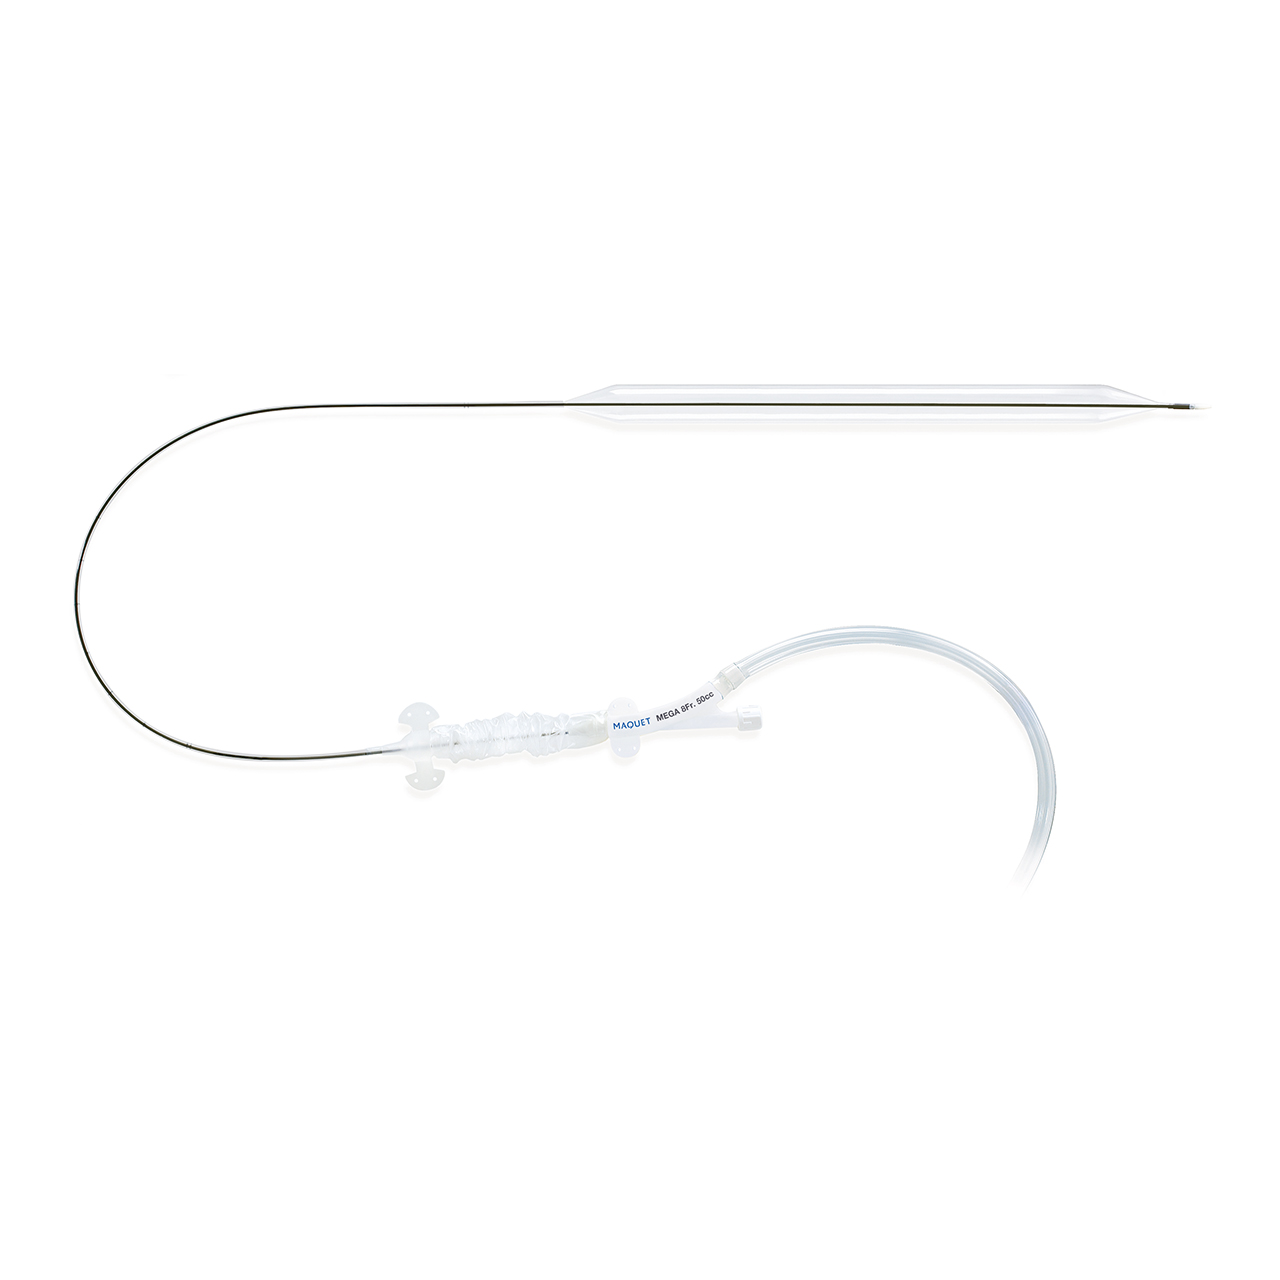 Mega inta-aortic balloon catheter offers increased augementation for patients of all heights in need of hemodynamic support